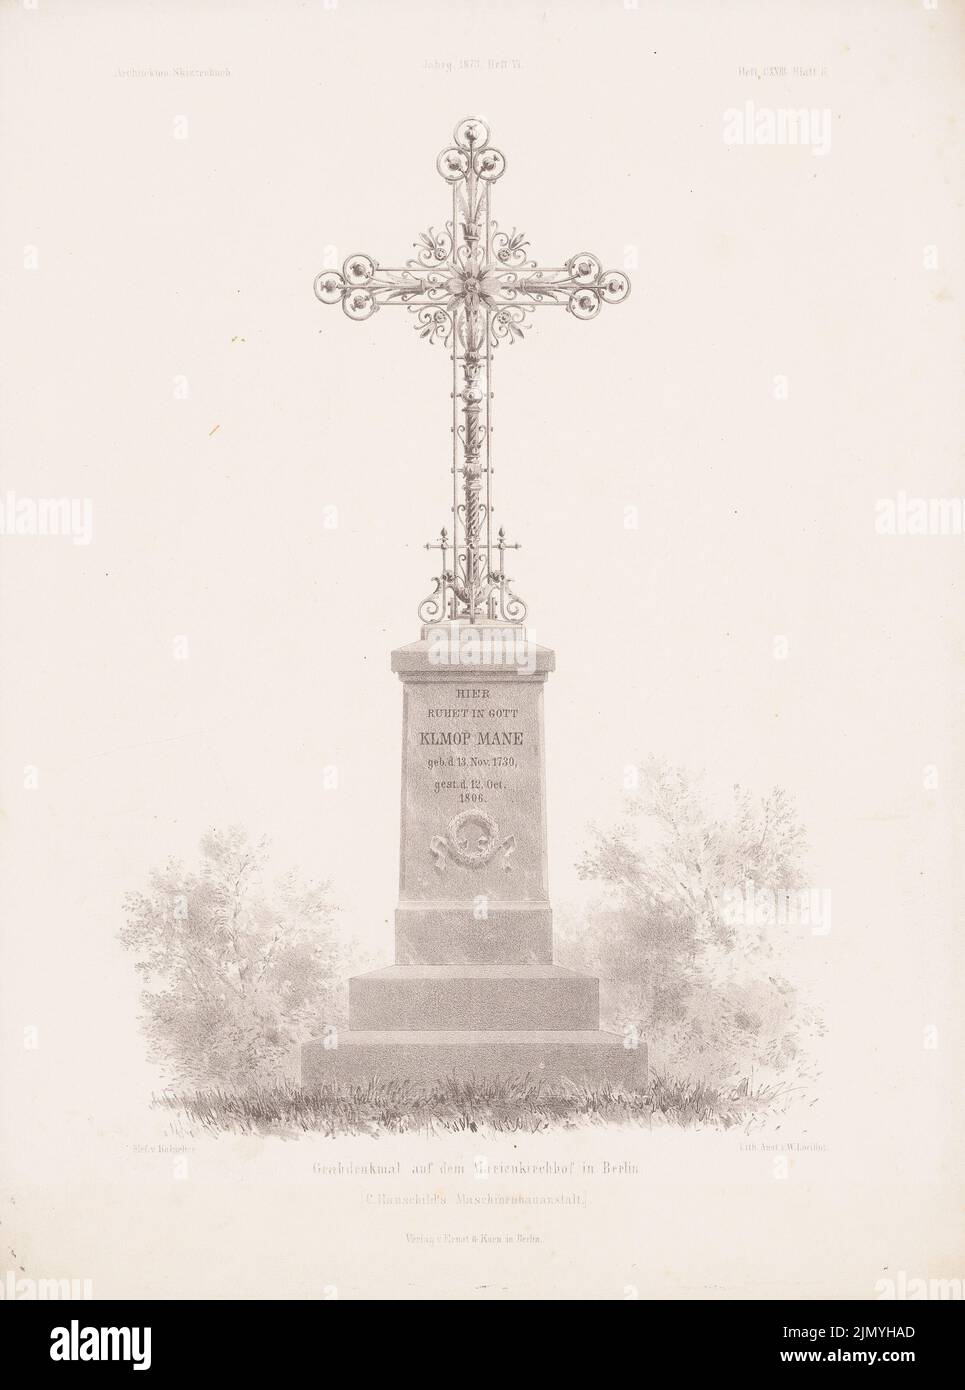 Kolscher Bernhard (1834-1868), grave monument at the Marienkirchhof, Berlin. (From: Architectural sketchbook, H. 123/6, 1873.) (1873-1873): View. Lithograph on paper, 35.7 x 26.5 cm (including scan edges) Stock Photo